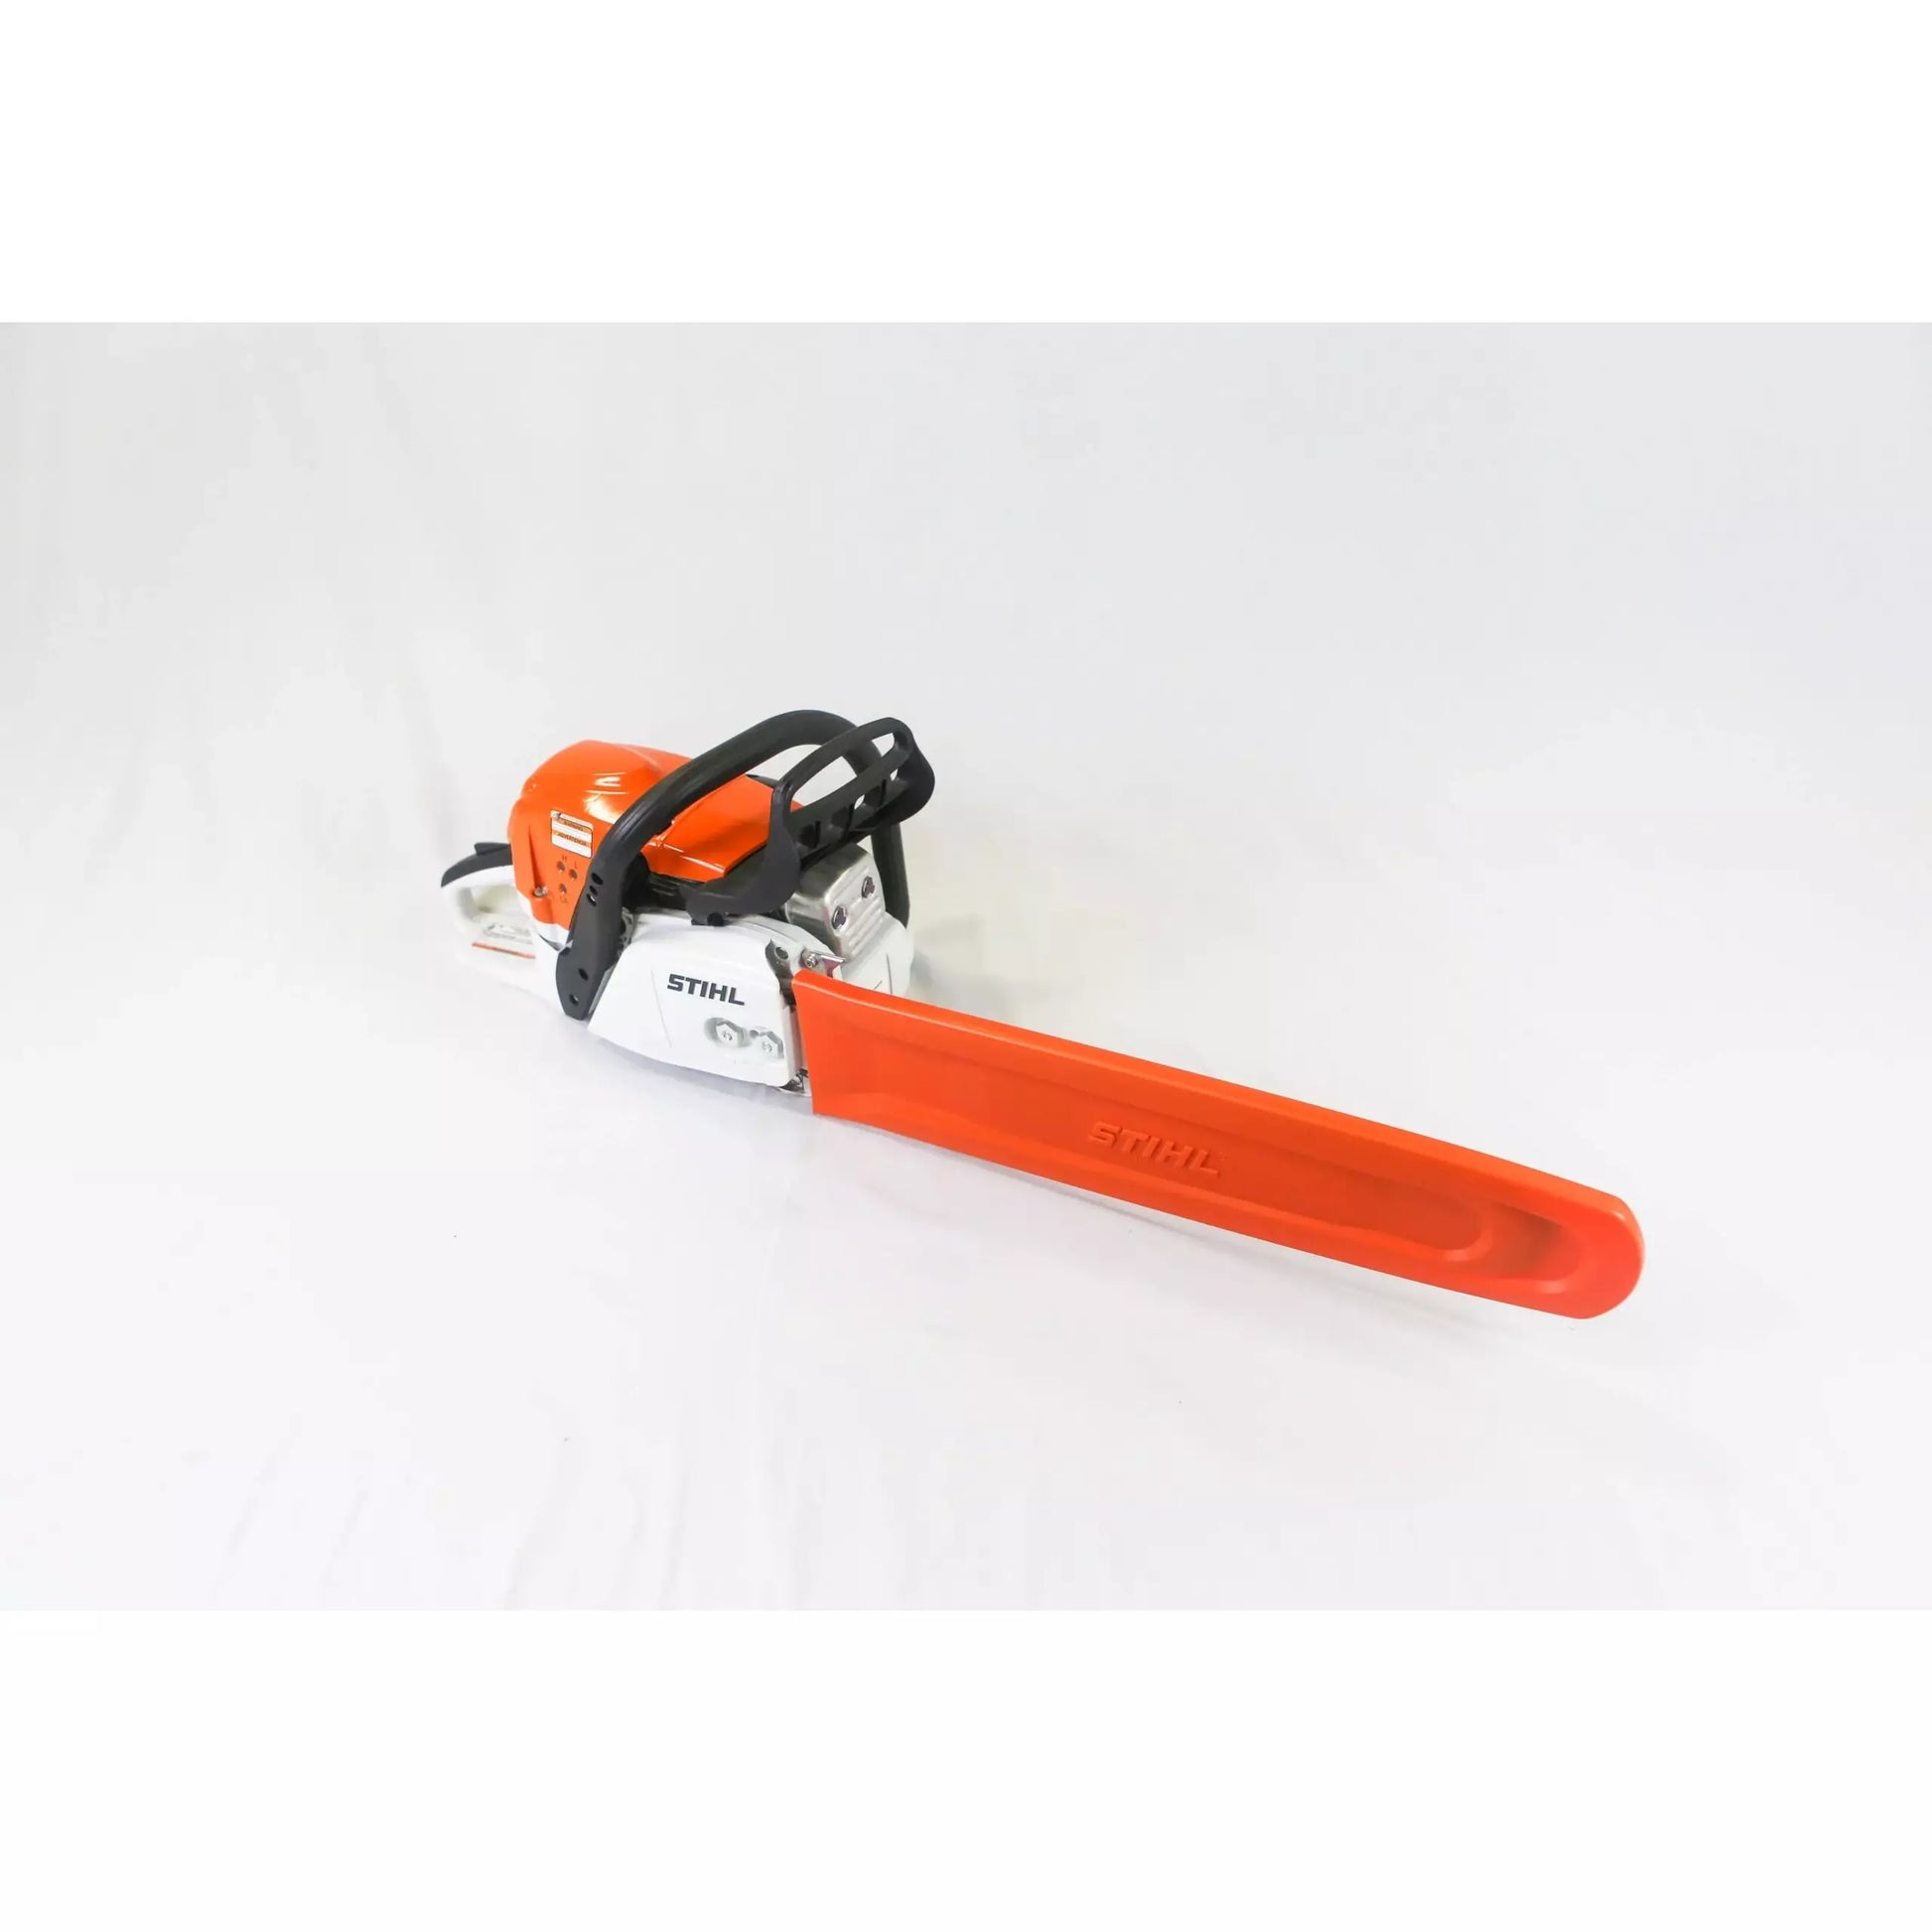 STIHL MS 171 16 in. 31.8 cc Gas Powered Chainsaw – Procore Power Equipment